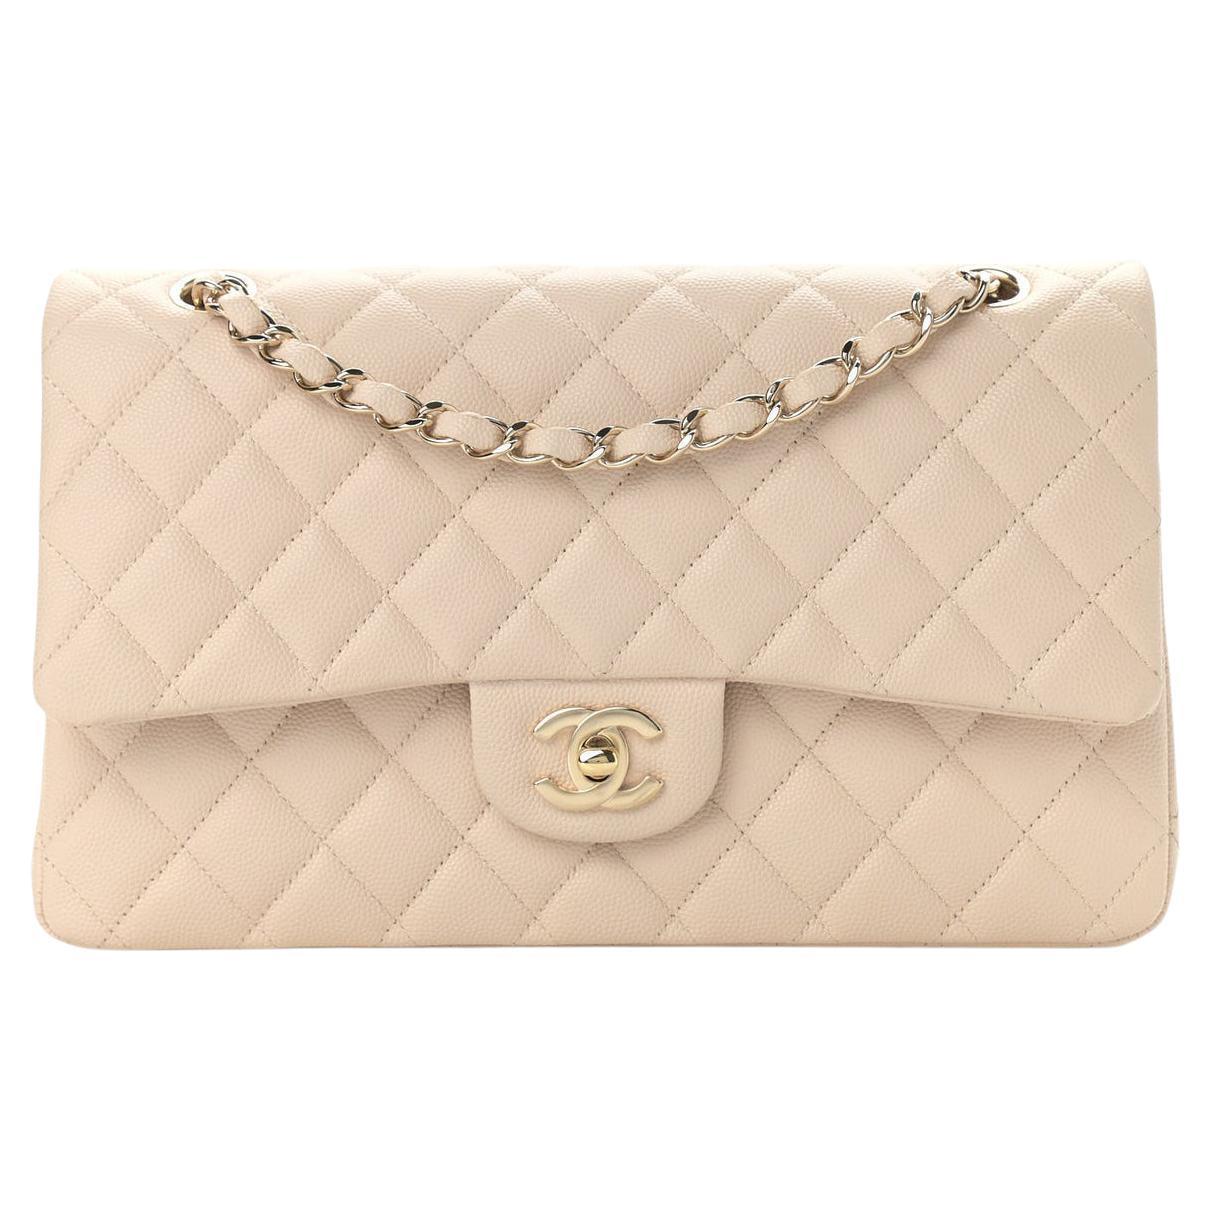 CHANEL NEW Beige Tan Caviar Leather Quilted Gold Hardware Medium Double Flap Bag